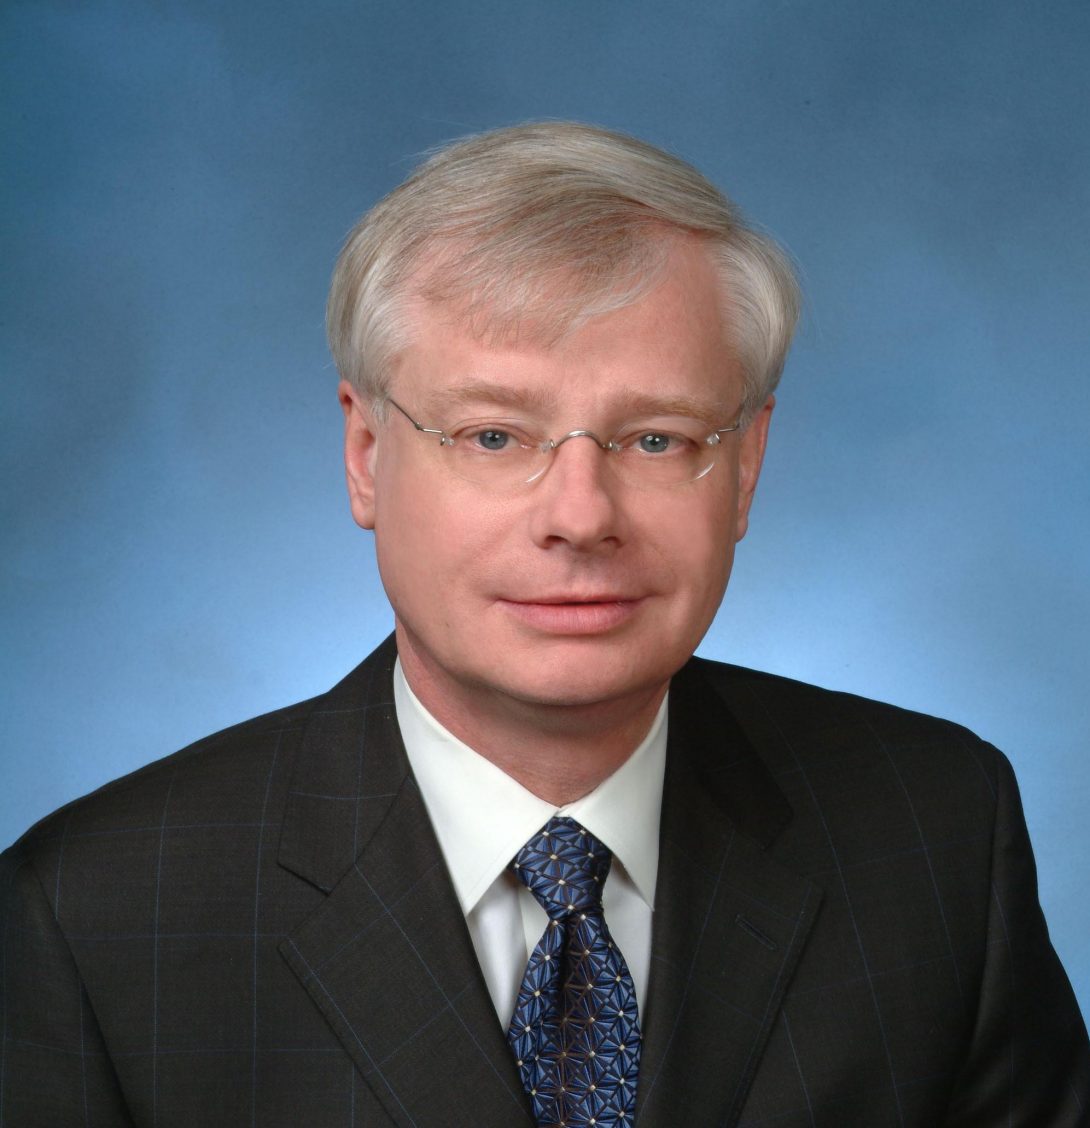 Dr. Graham wearing a black suit and a blue tie